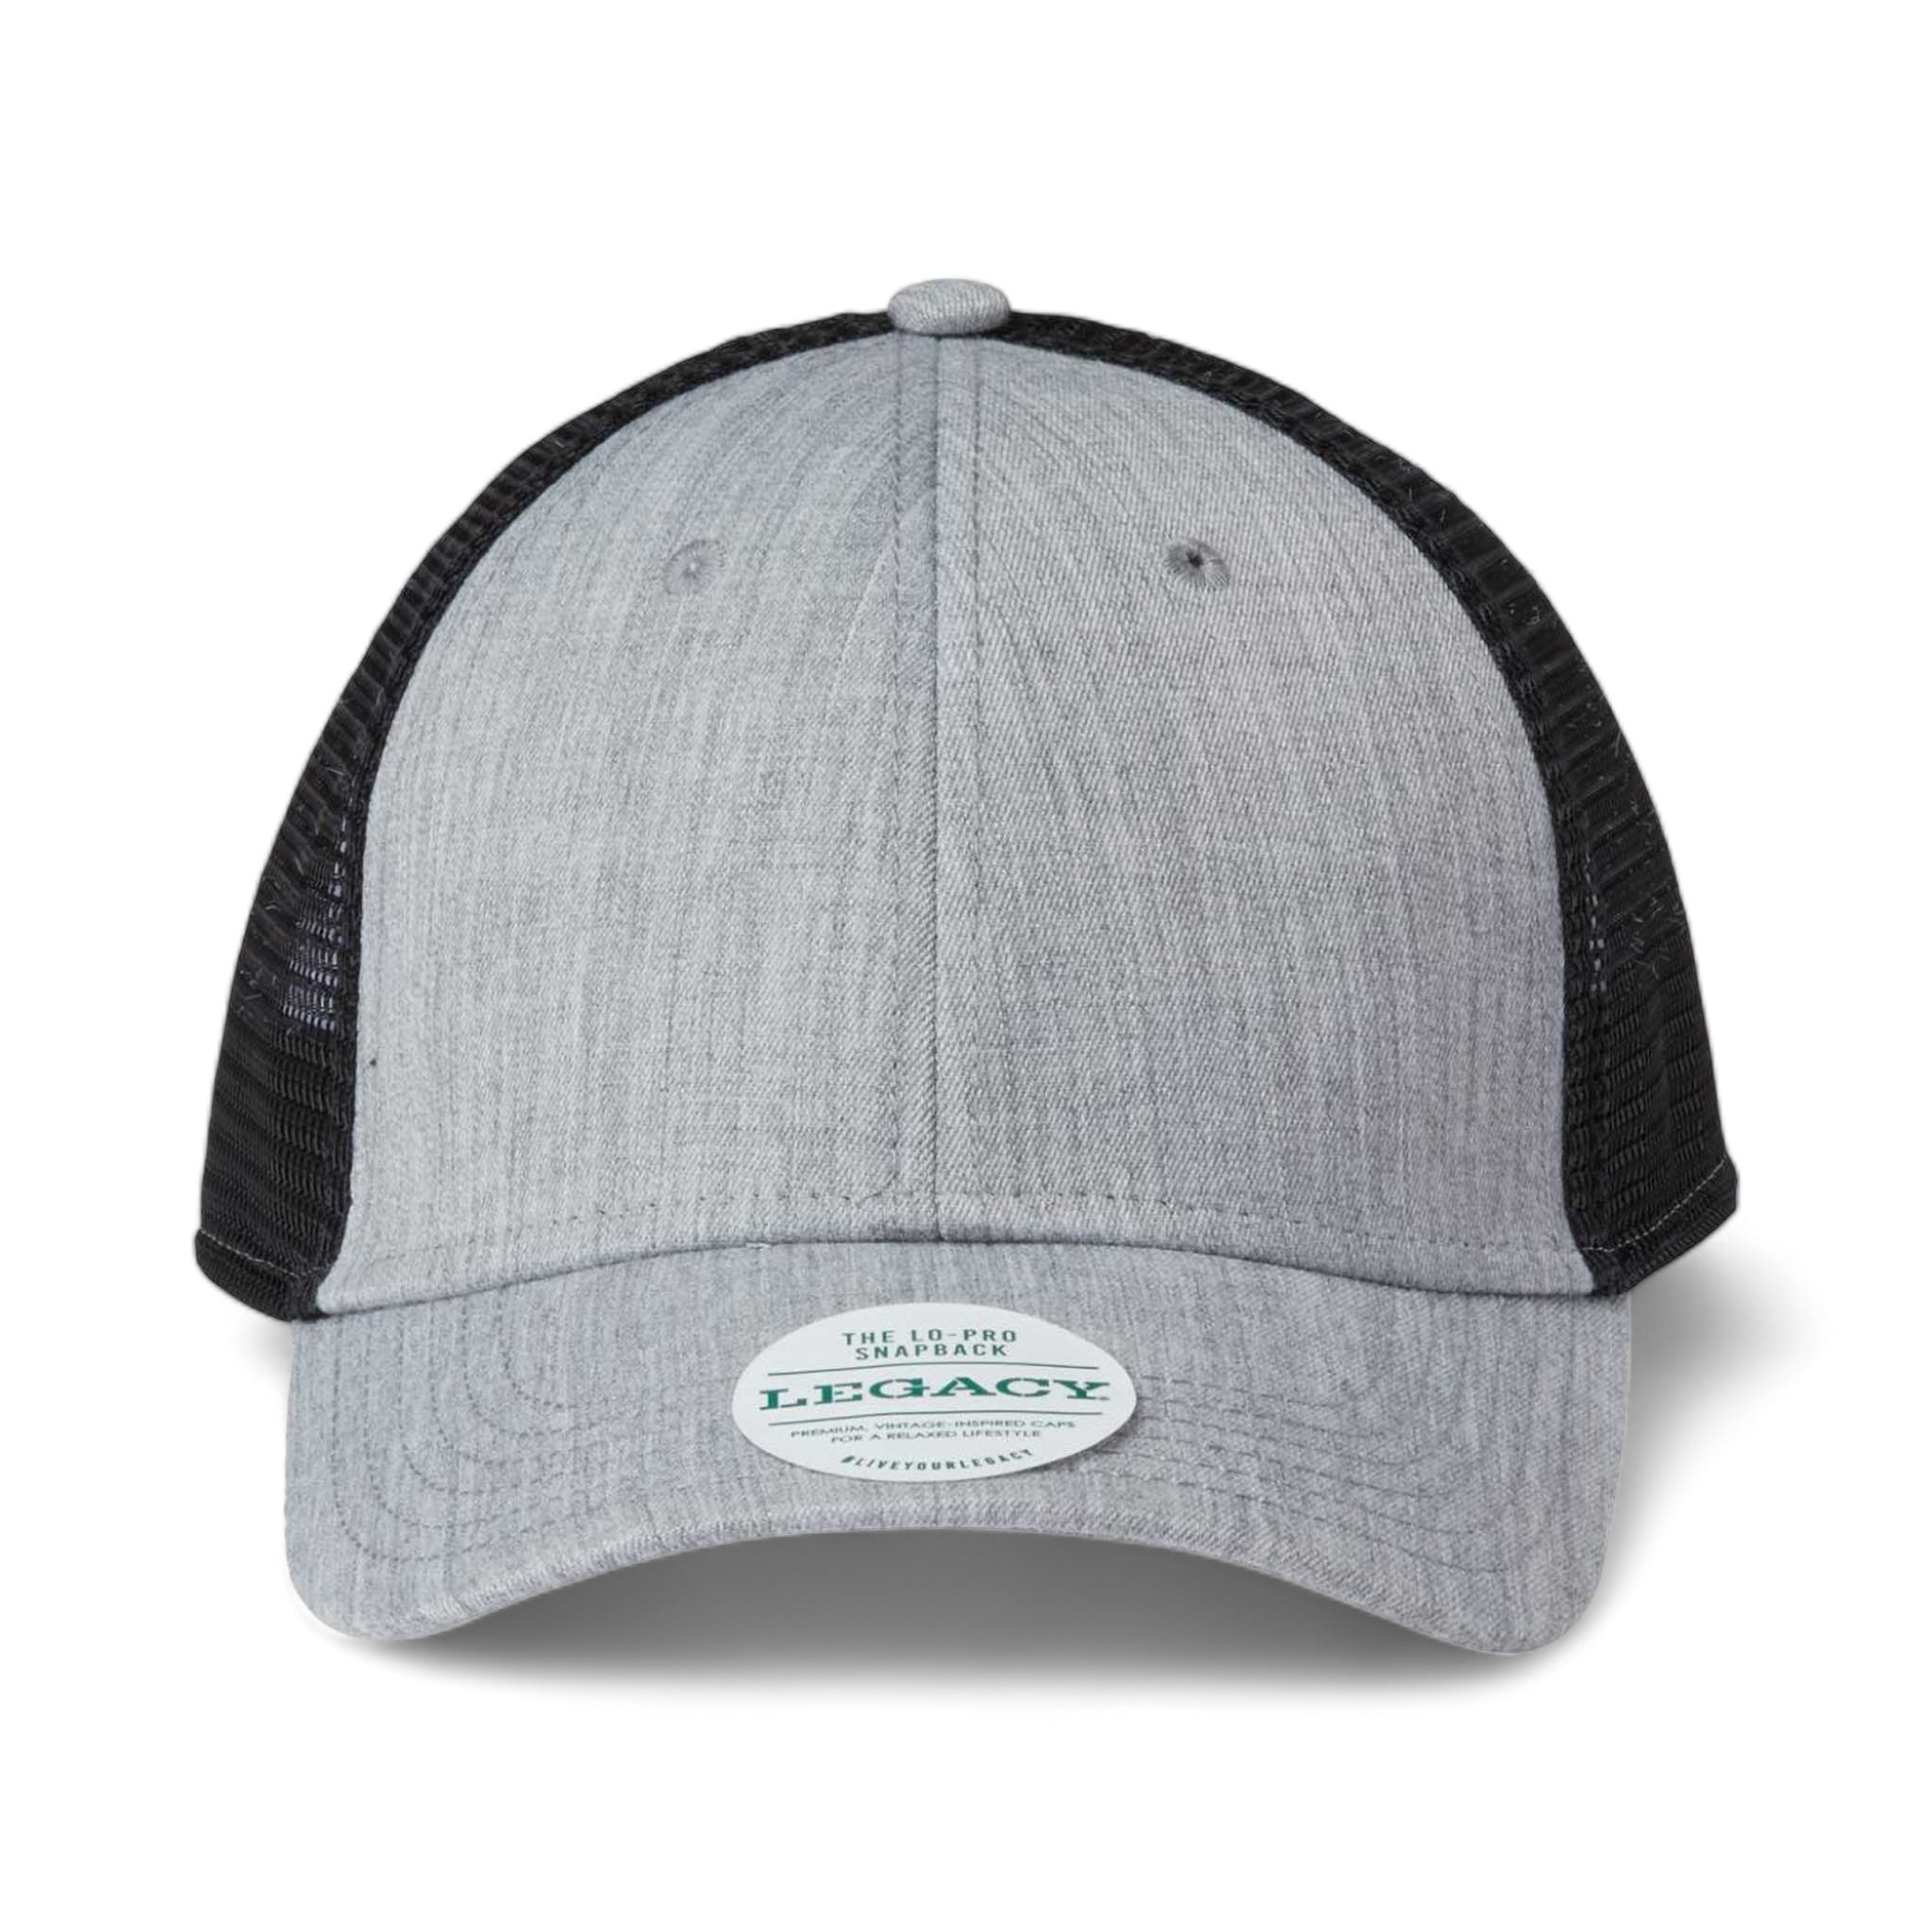 Front view of LEGACY LPS custom hat in heather grey and black